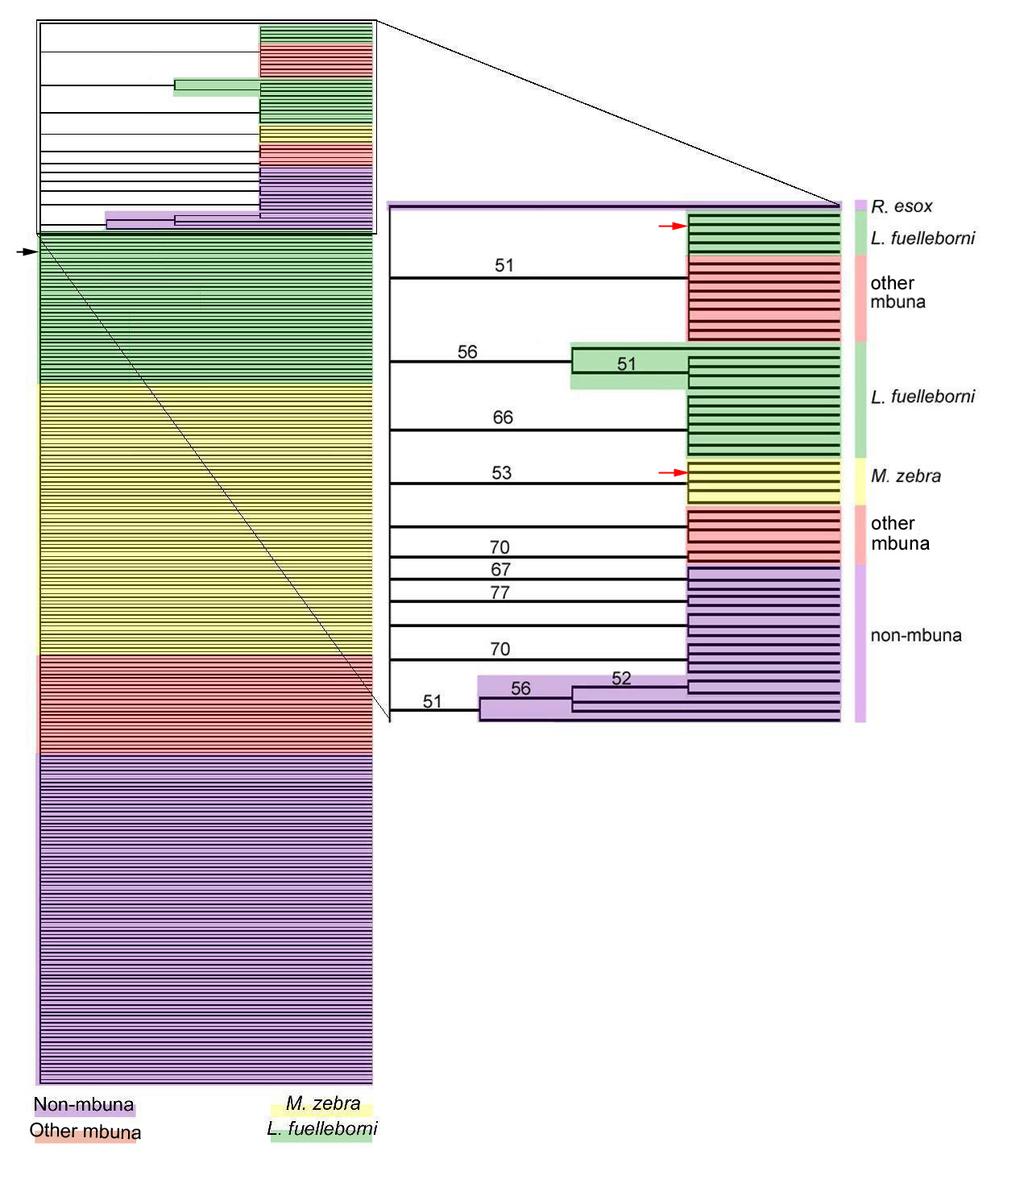 Figure 5. Dlx2 phylogenetic distance tree constructed using PAUP 4.0. L. fuelleborni sequences are shown in green, M. zebra in yellow, other mbuna in red, and non-mbuna in purple.